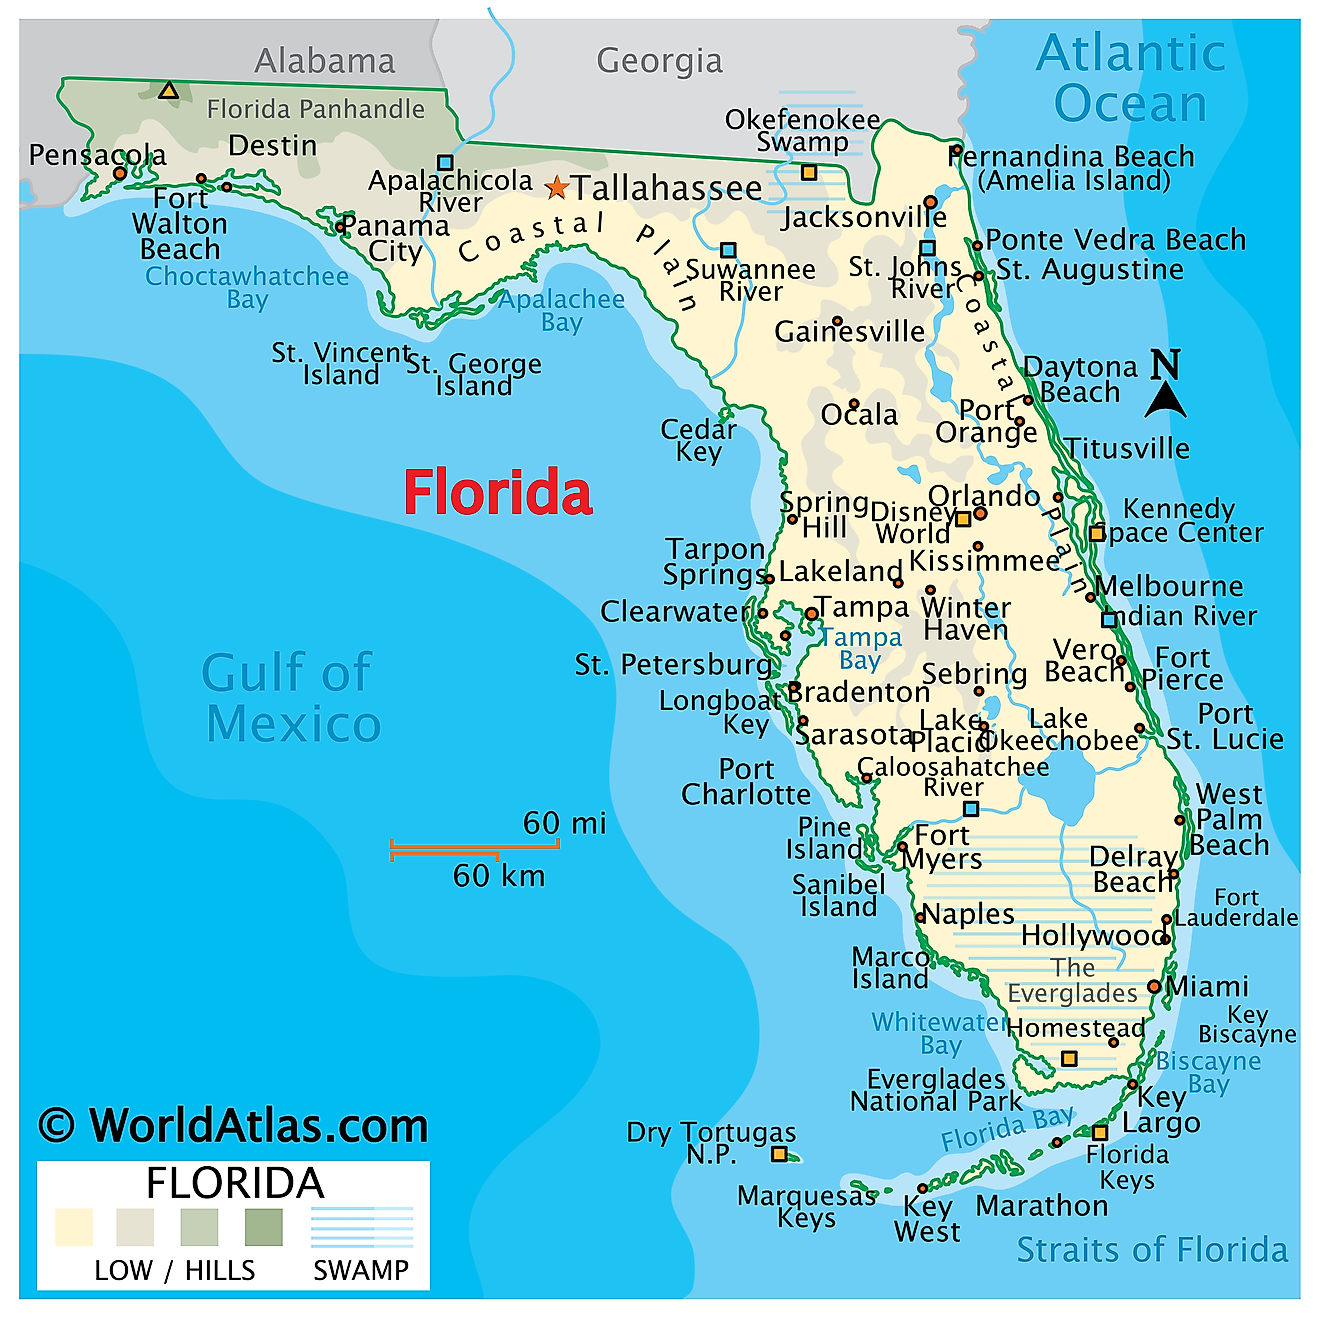 The map of Florida.